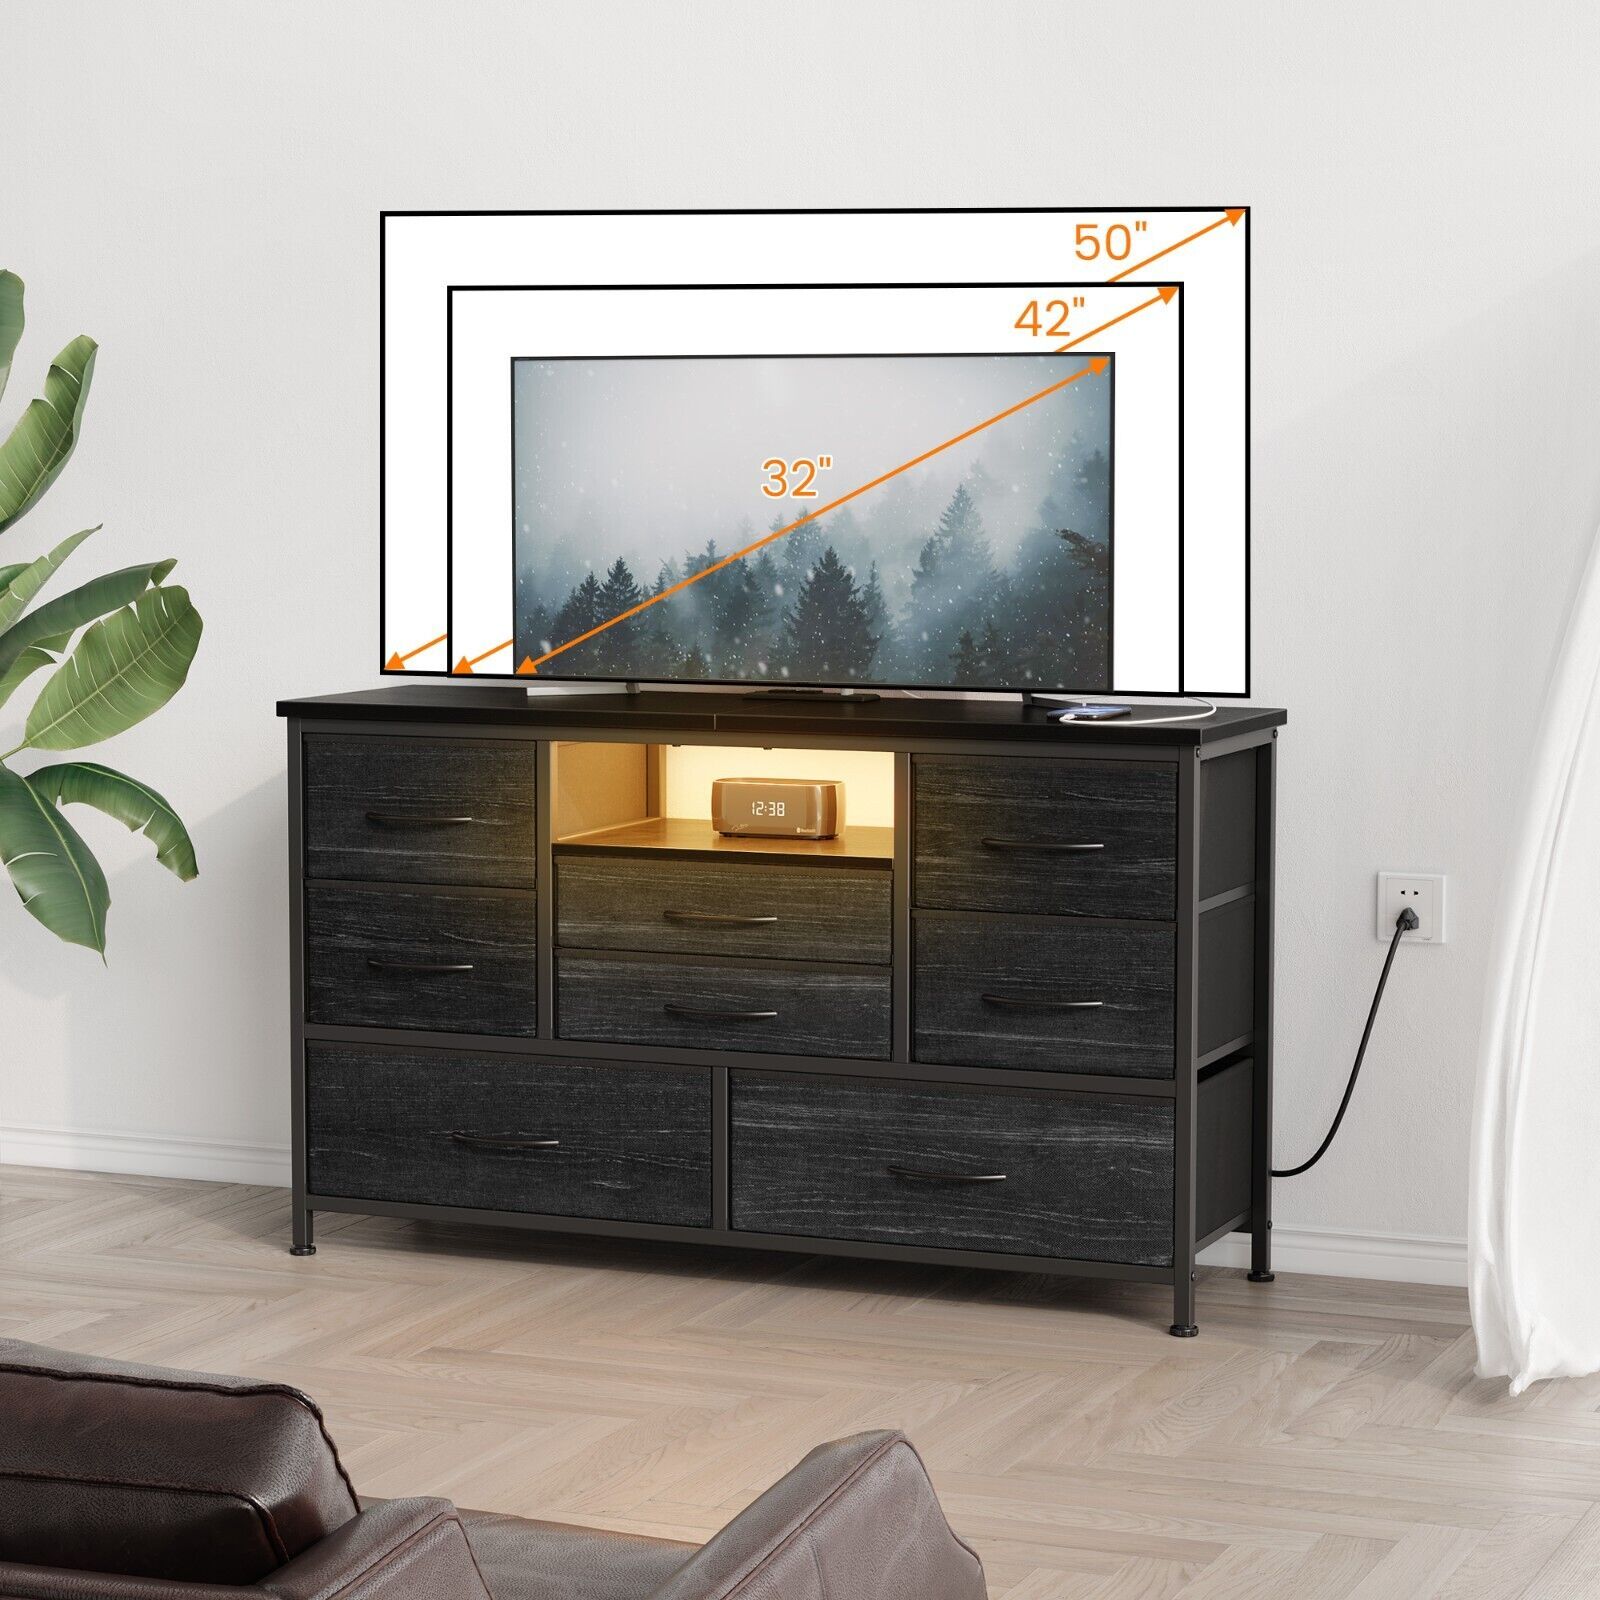 Dresser Tv Stand With Led Light Power Outlet Bedroom Chest Of Drawer For  55'' Tv | Fabricating And Metalworking For Led Tv Stands With Outlet (View 15 of 15)